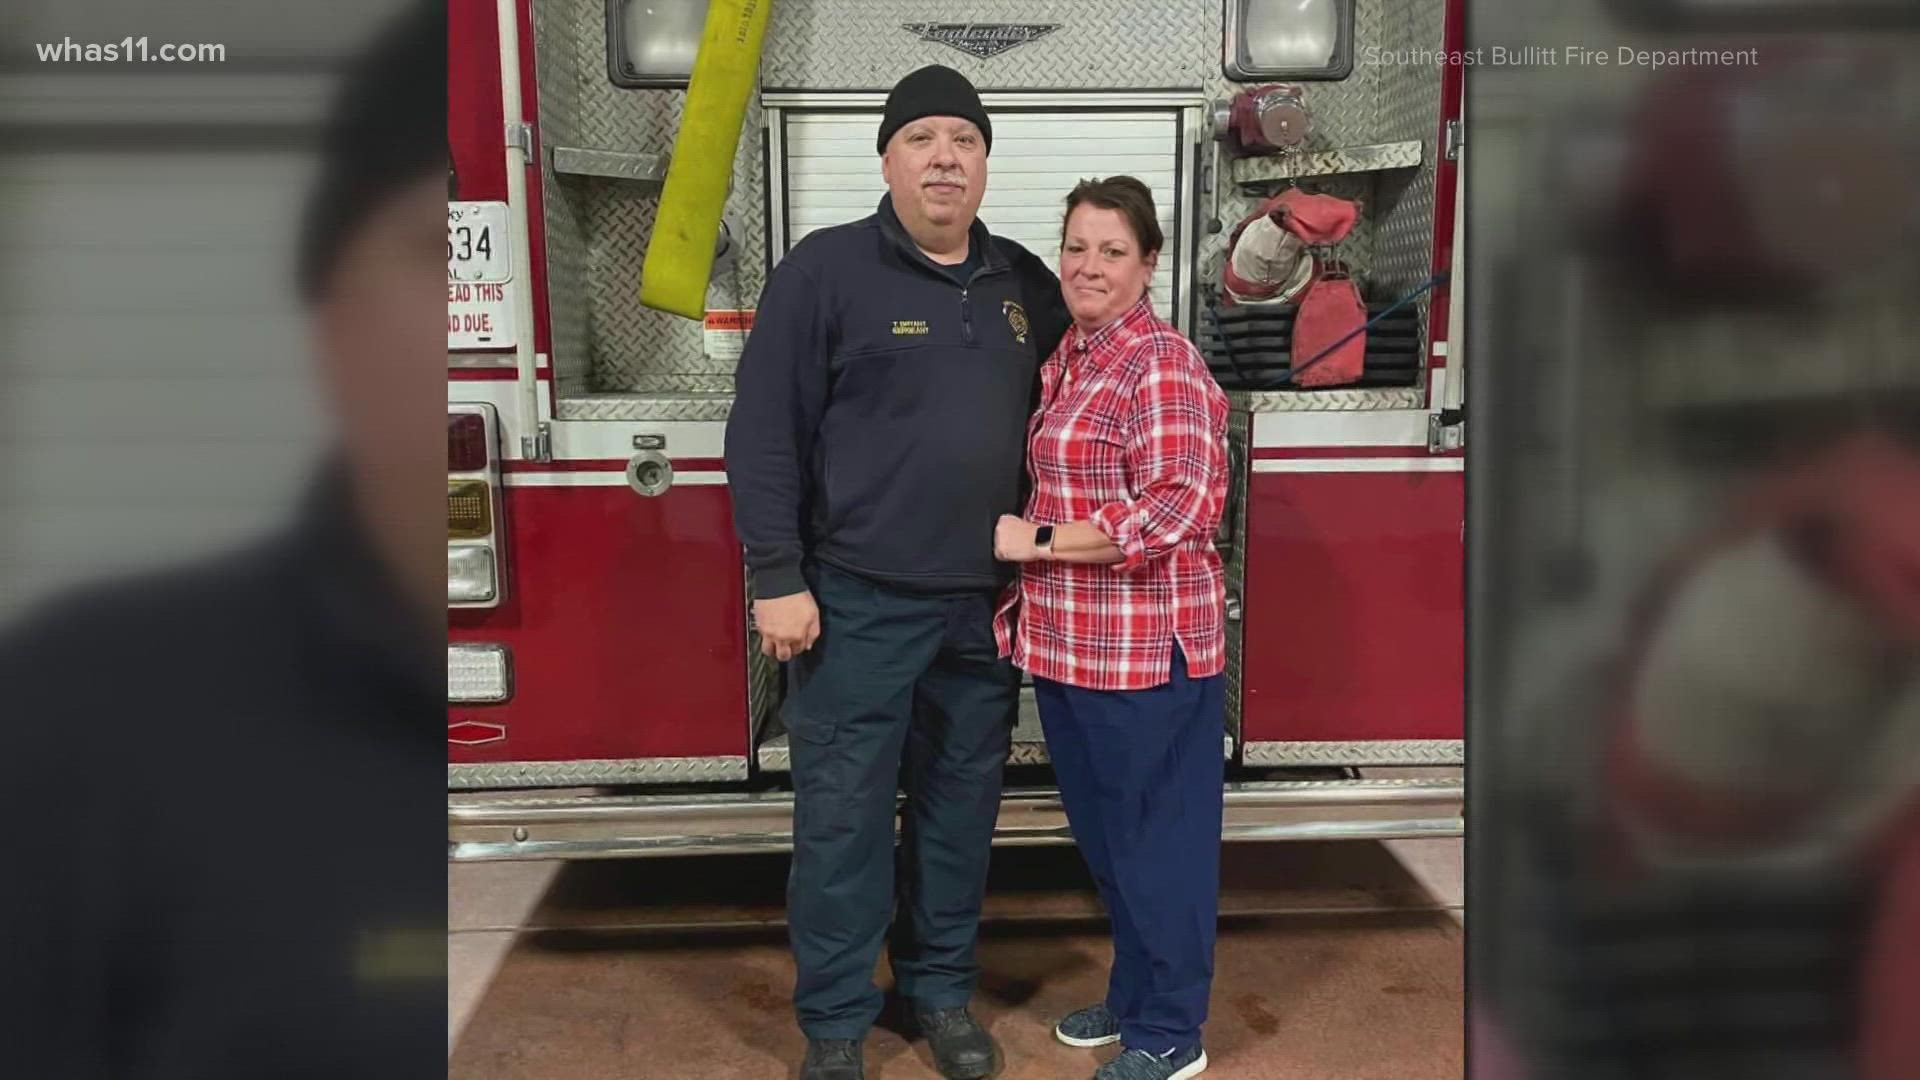 Lt. Terrell Bryant and his wife Christina were involved in a fiery crash a week ago today.